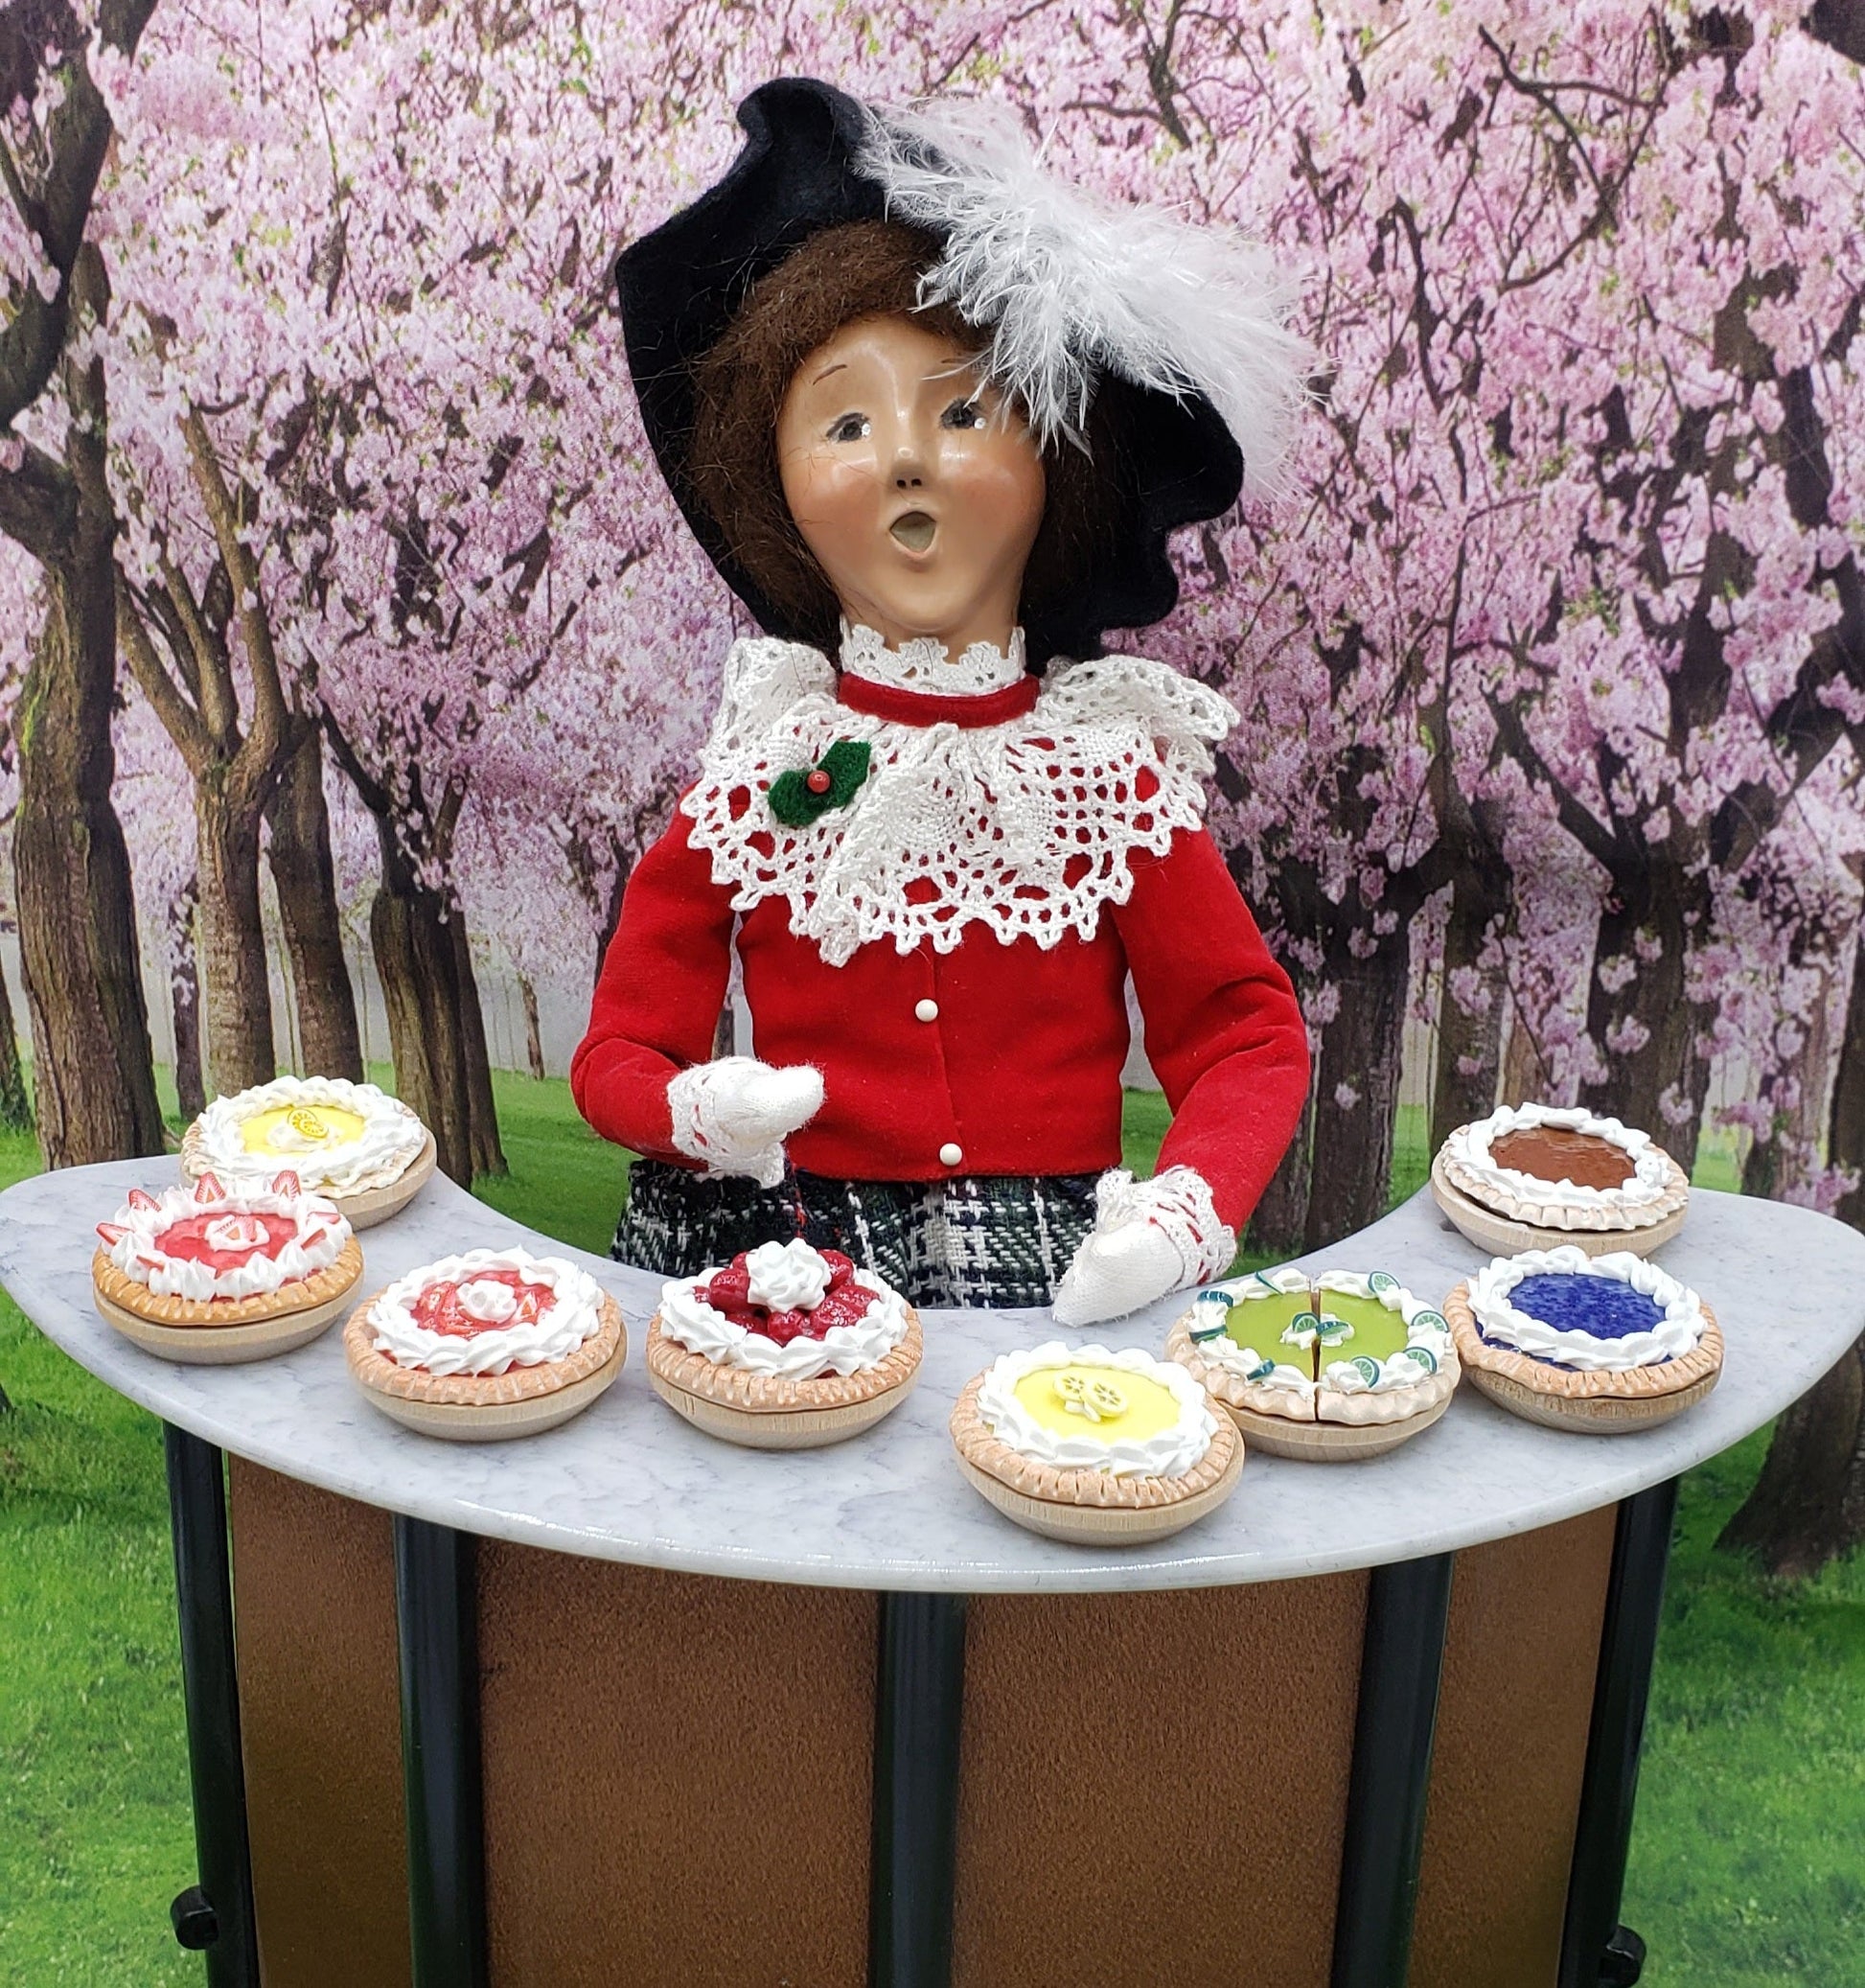 Byers choice doll with pies